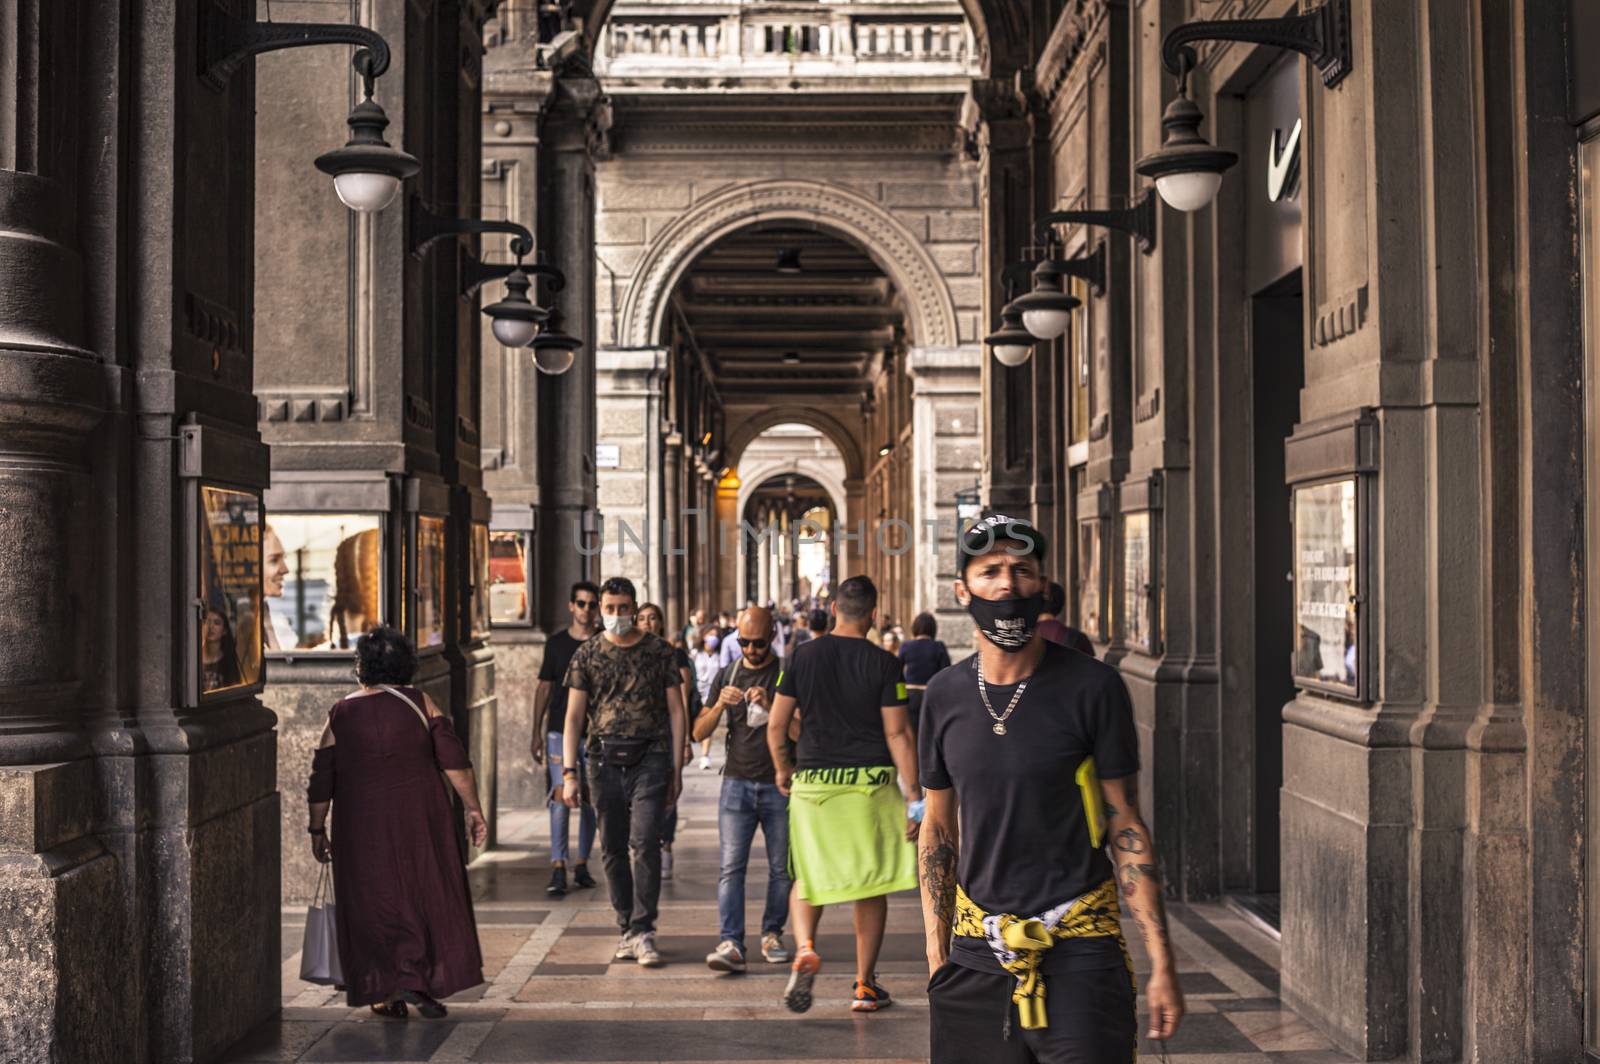 BOLOGNA, ITALY 17 JUNE 2020: People walking under Bologna's Arcades in Italy